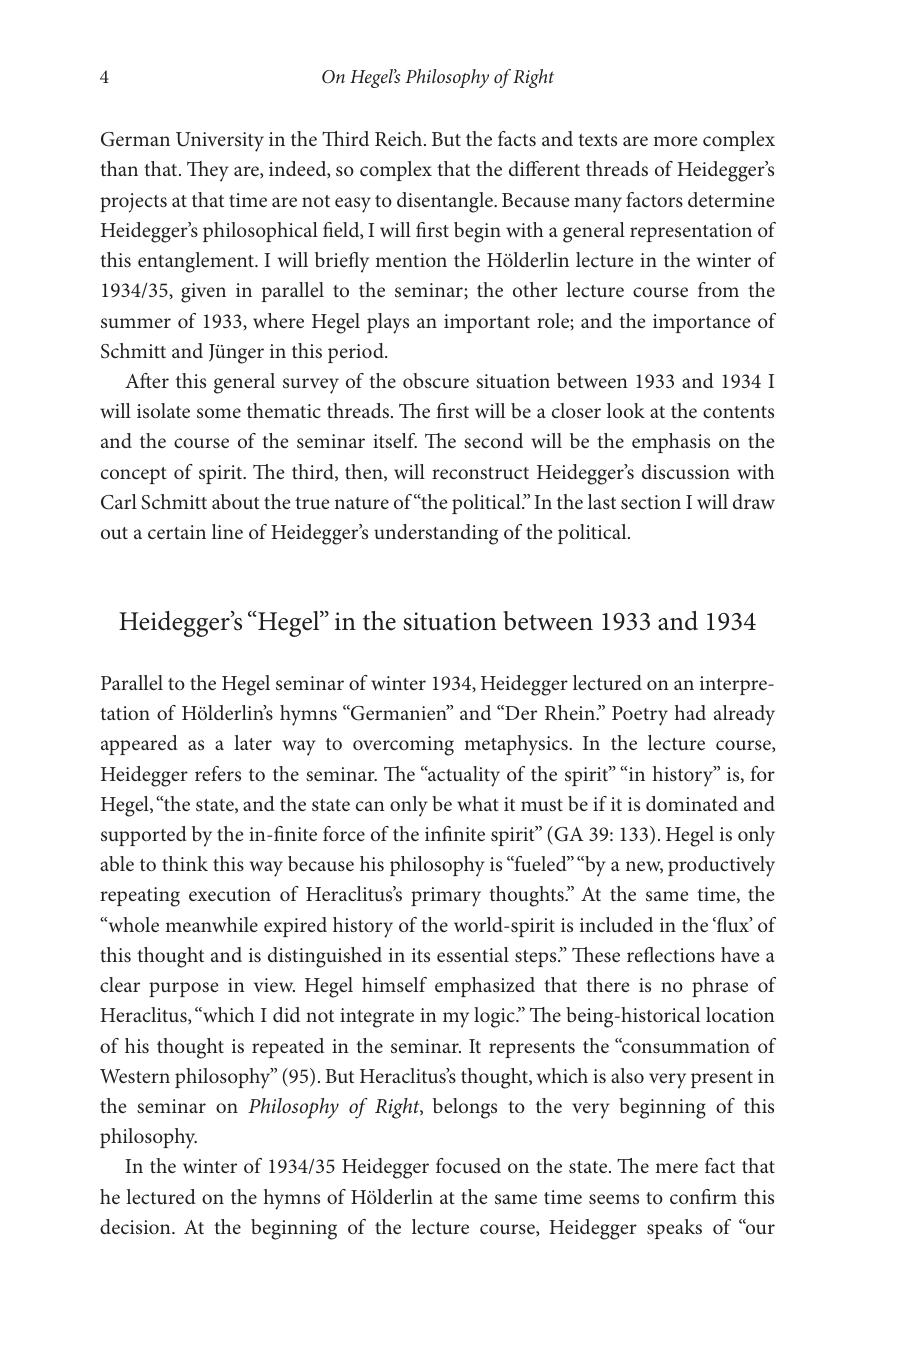 On Hegel’s Philosophy of Right The 1934-35 Seminar and Interpretive Essays by Martin Heidegger Peter Trawny Marcia Cavalcante Schuback Michael Marder - Portioned Sections